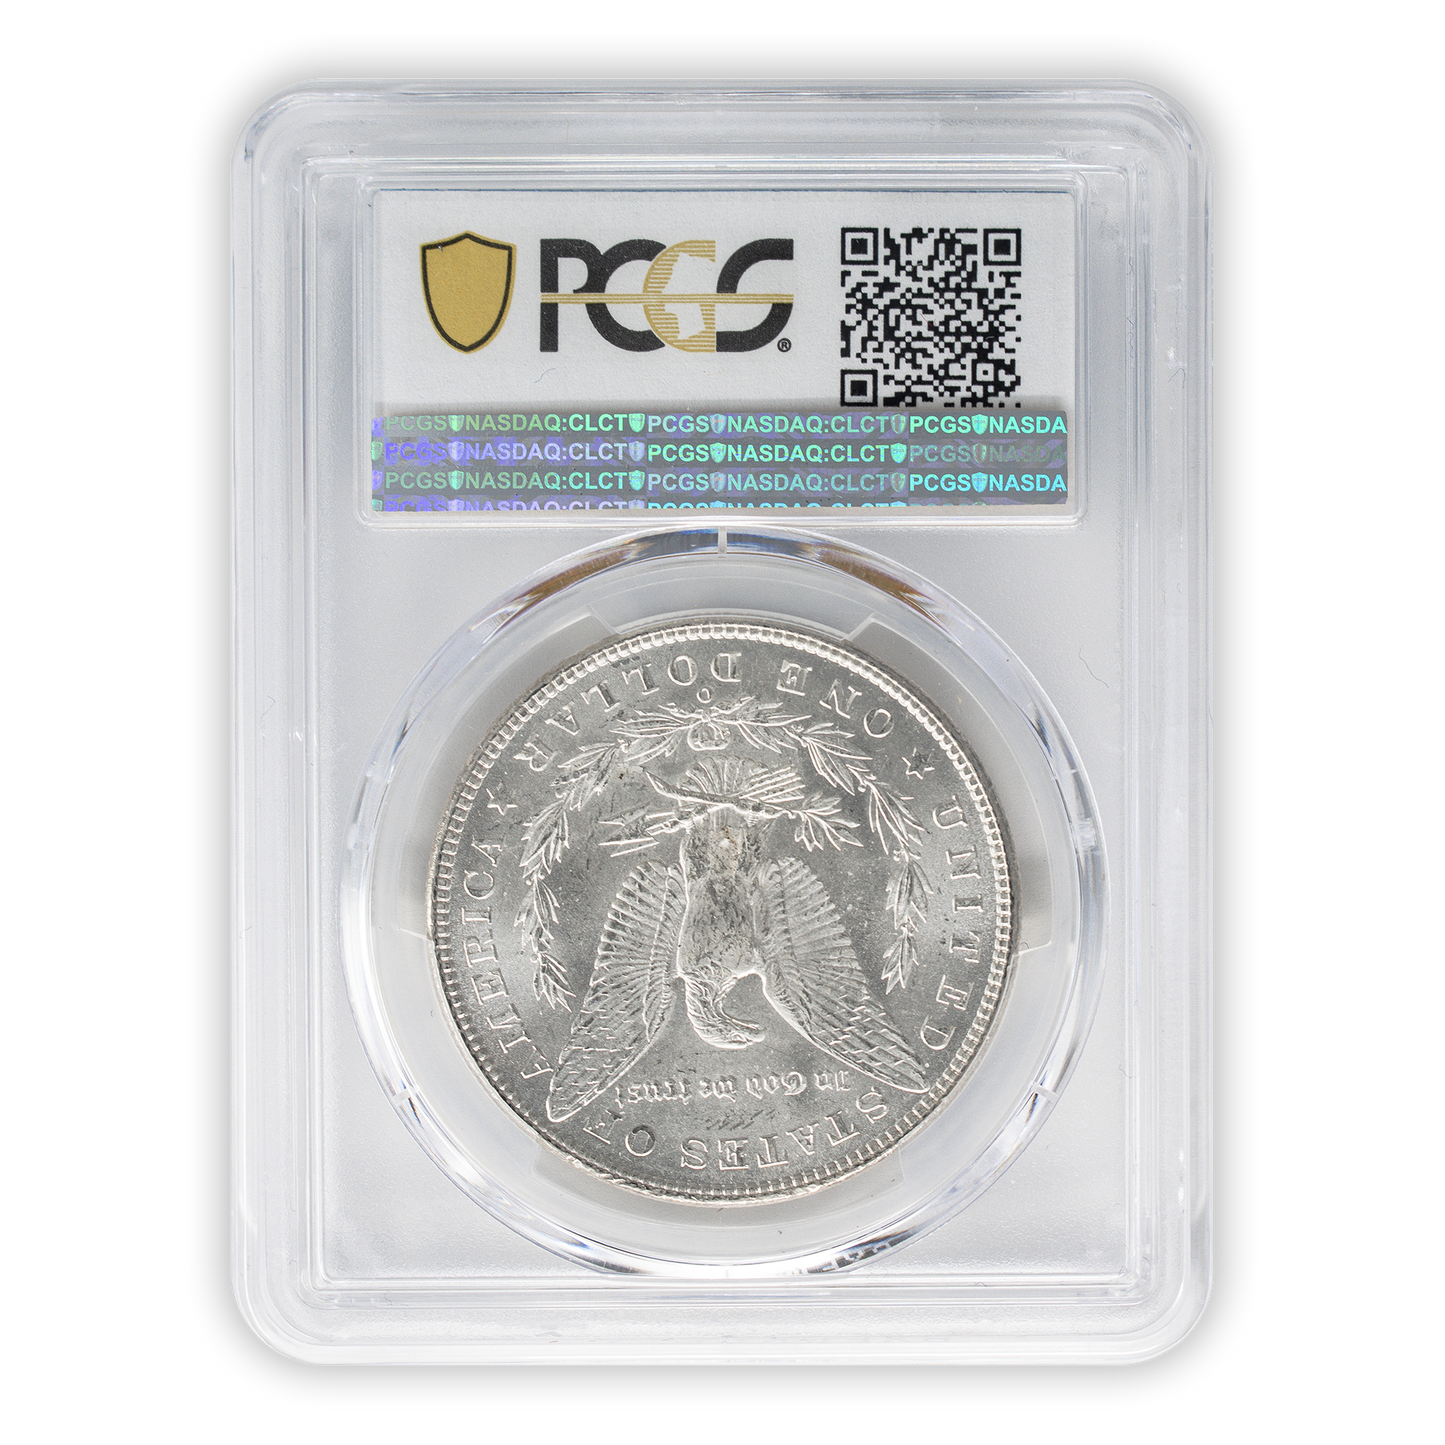 1901-O Morgan Silver Dollar New Orleans - PCGS MS64 Sight White